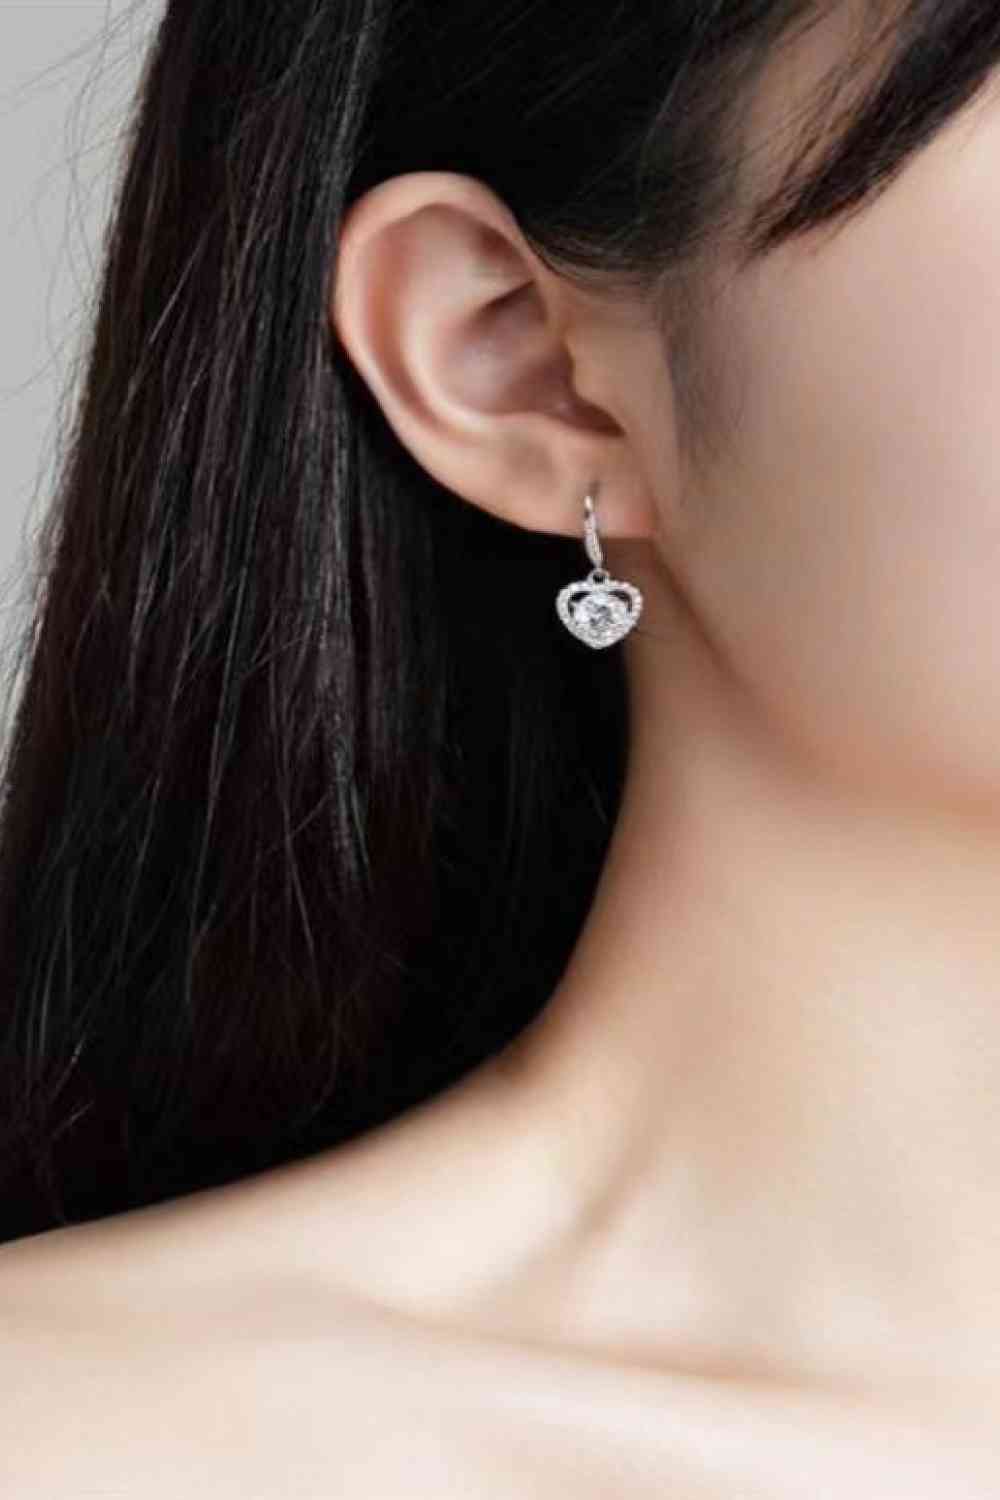 Model wearing Clear Moissanite heart earrings with zircon accent stones set in platinum plated sterling silver